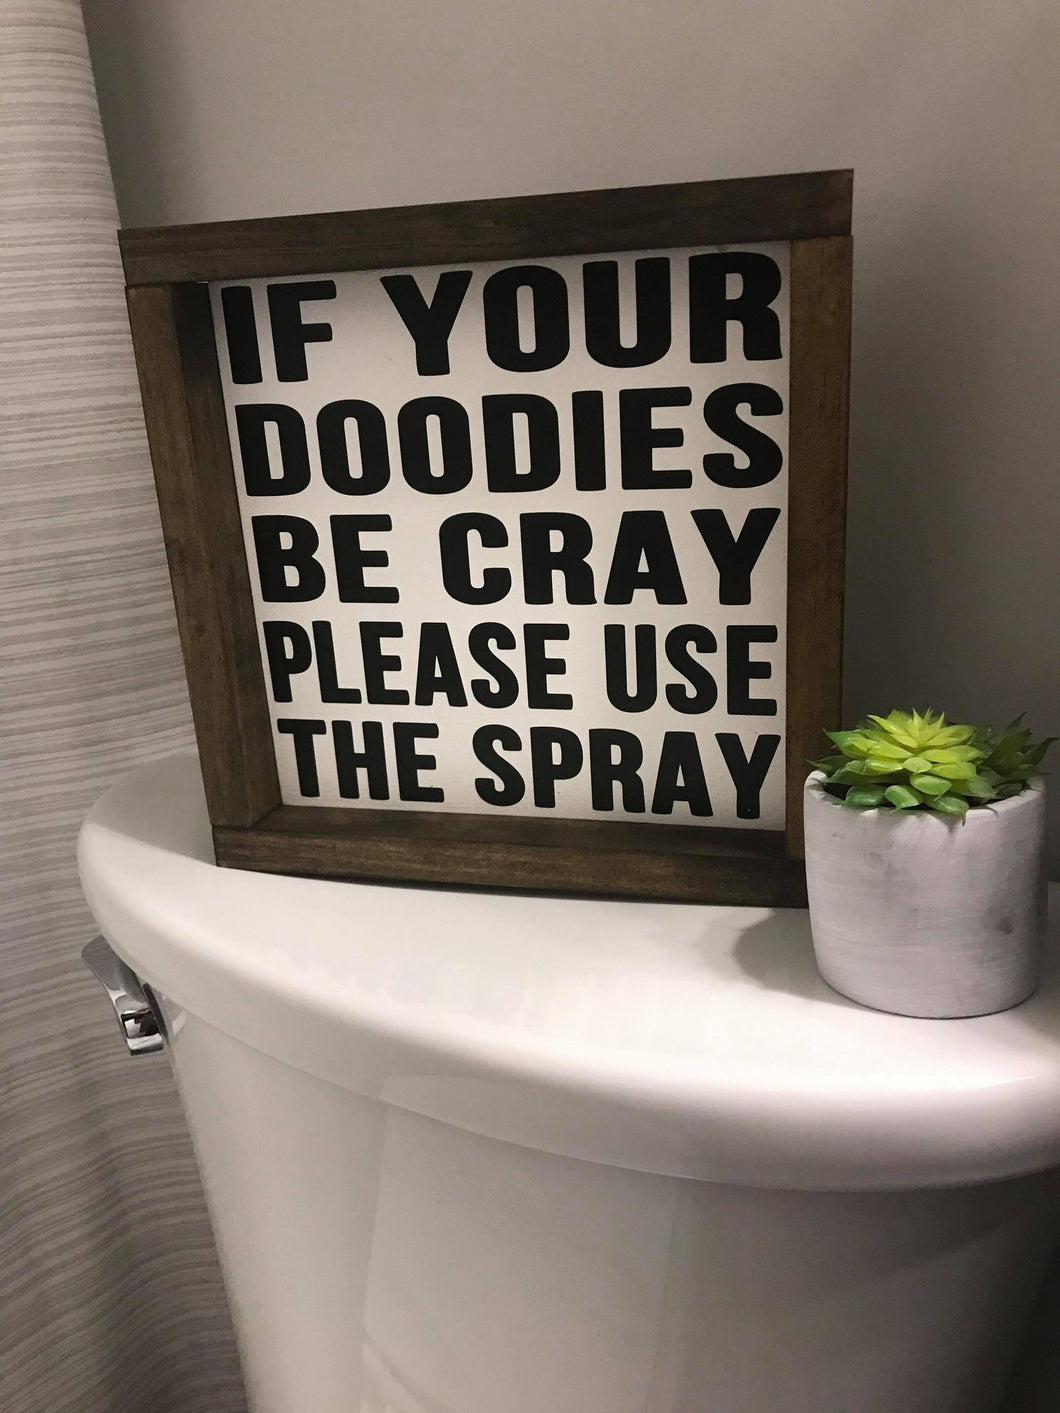 If your doodies be cray, please use the spray